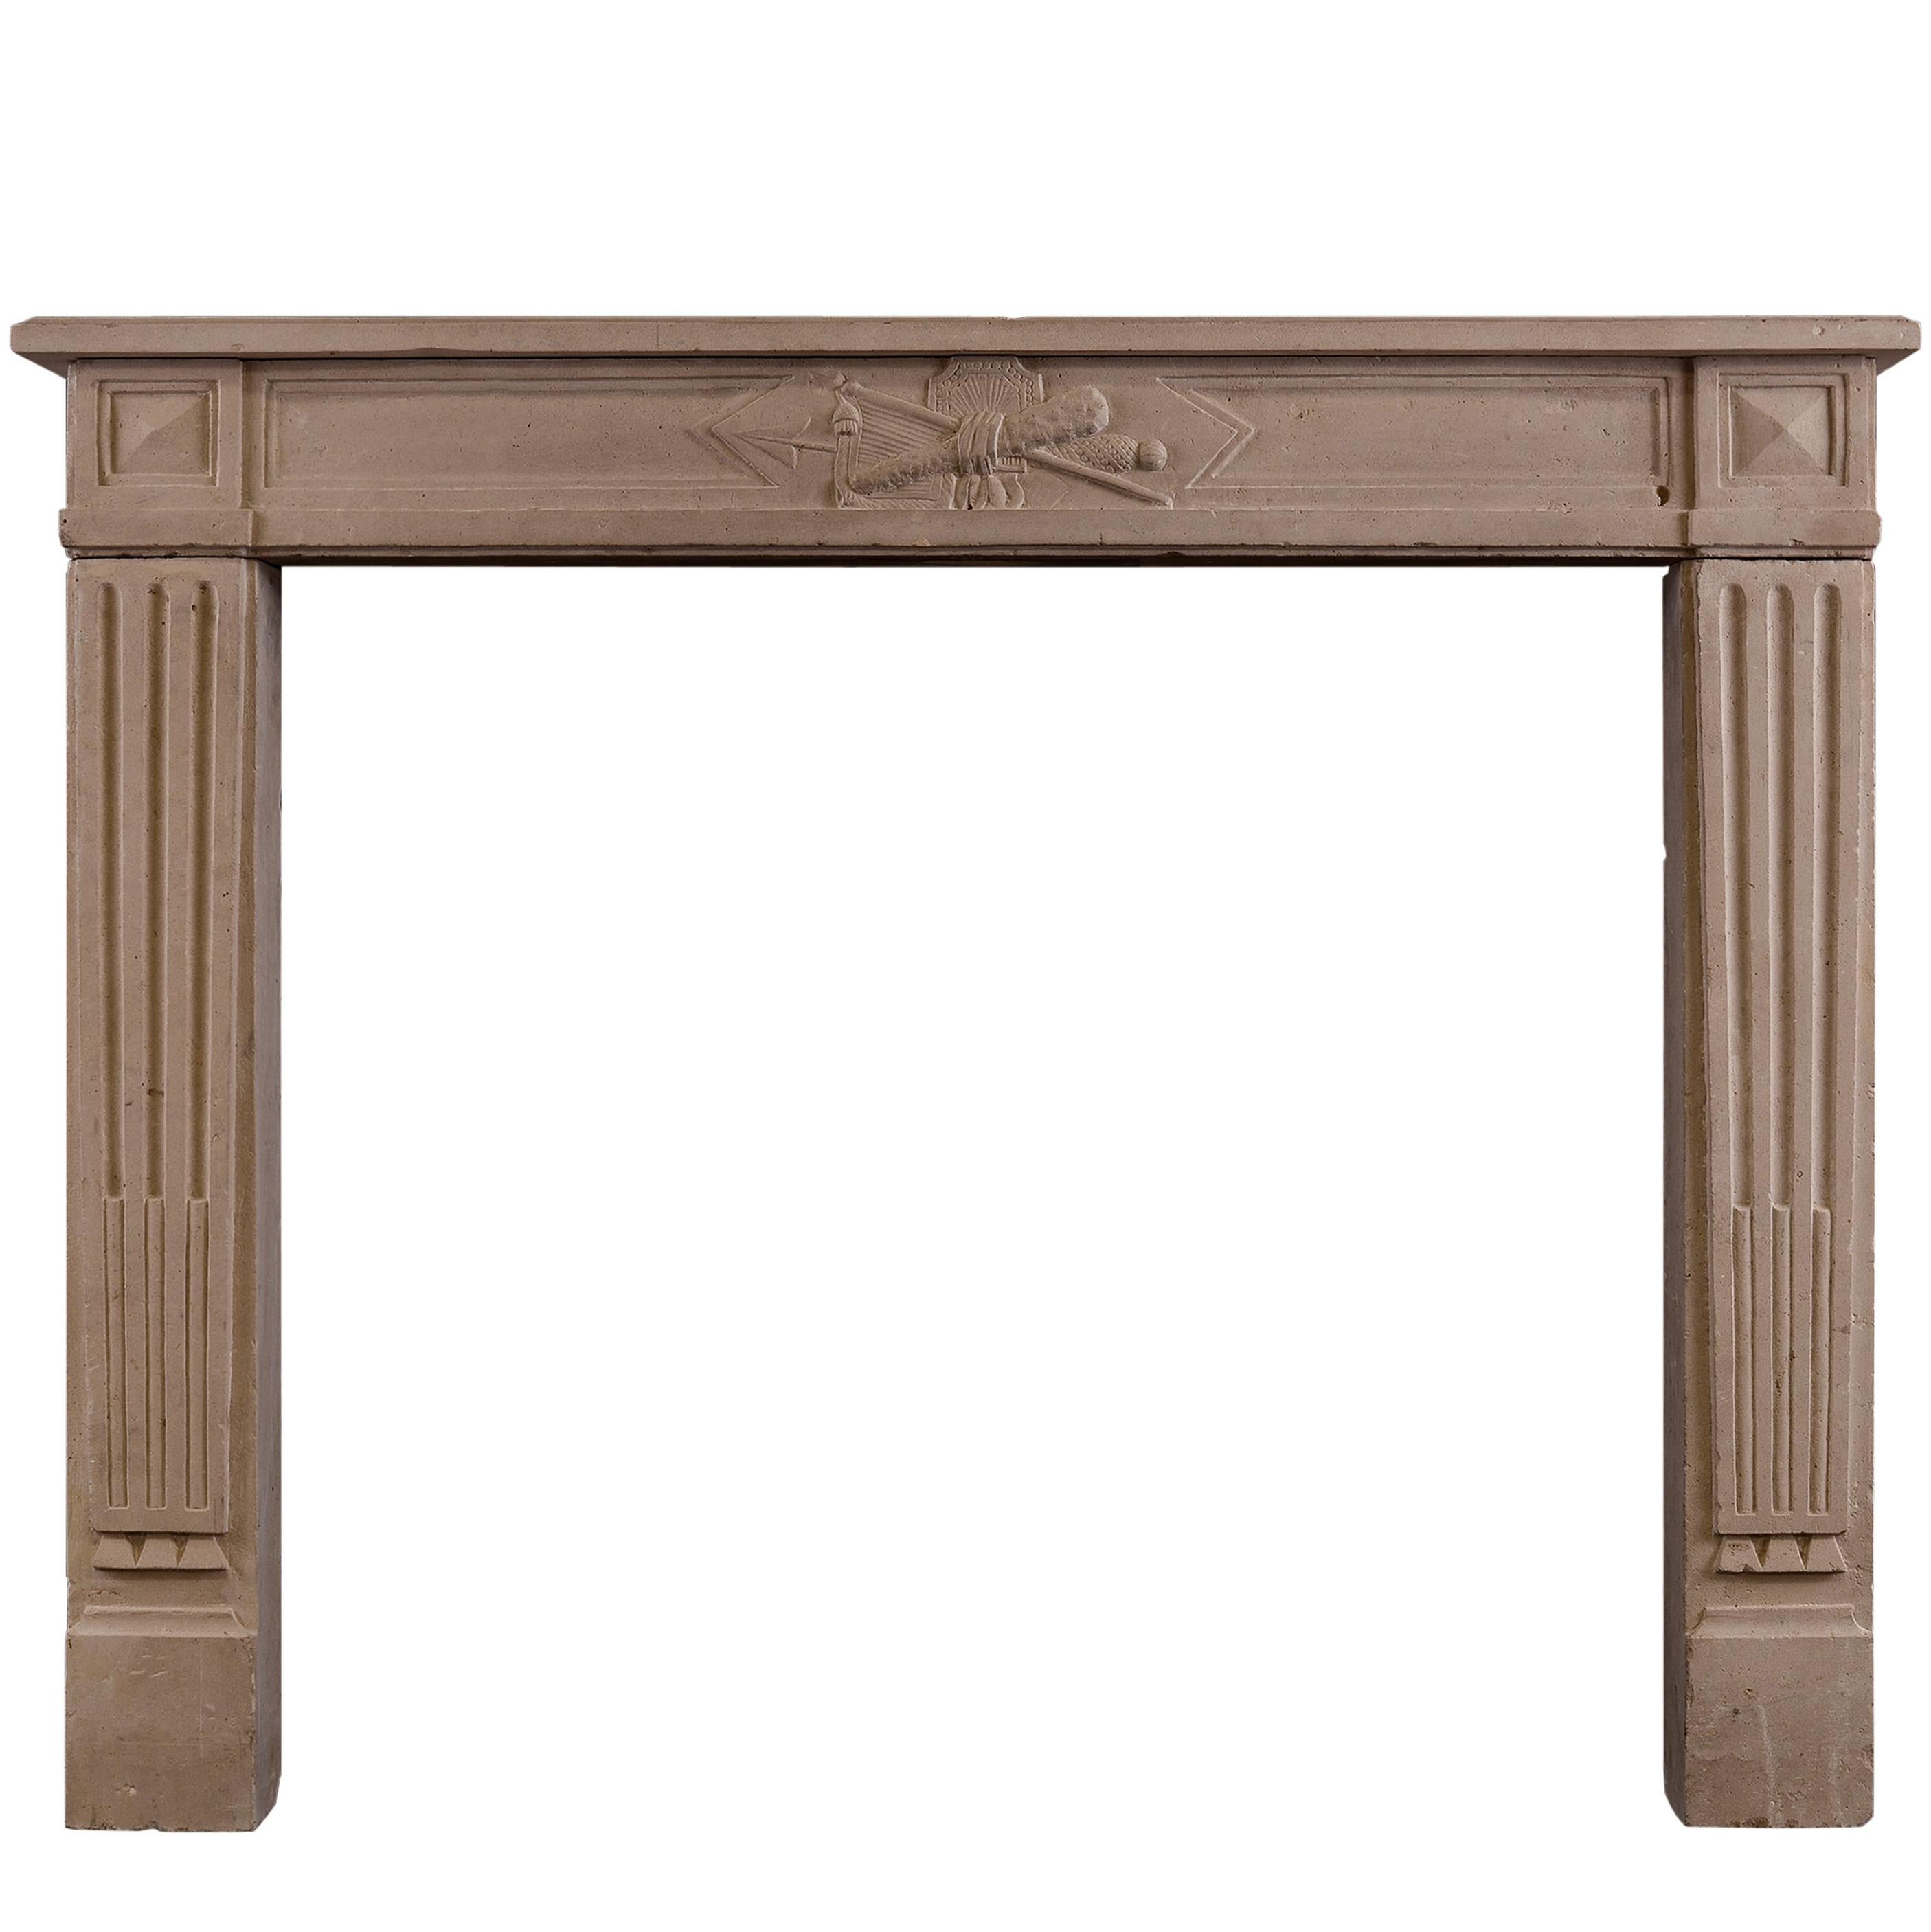 Louis XVI Style French Limestone Antique Fireplace For Sale